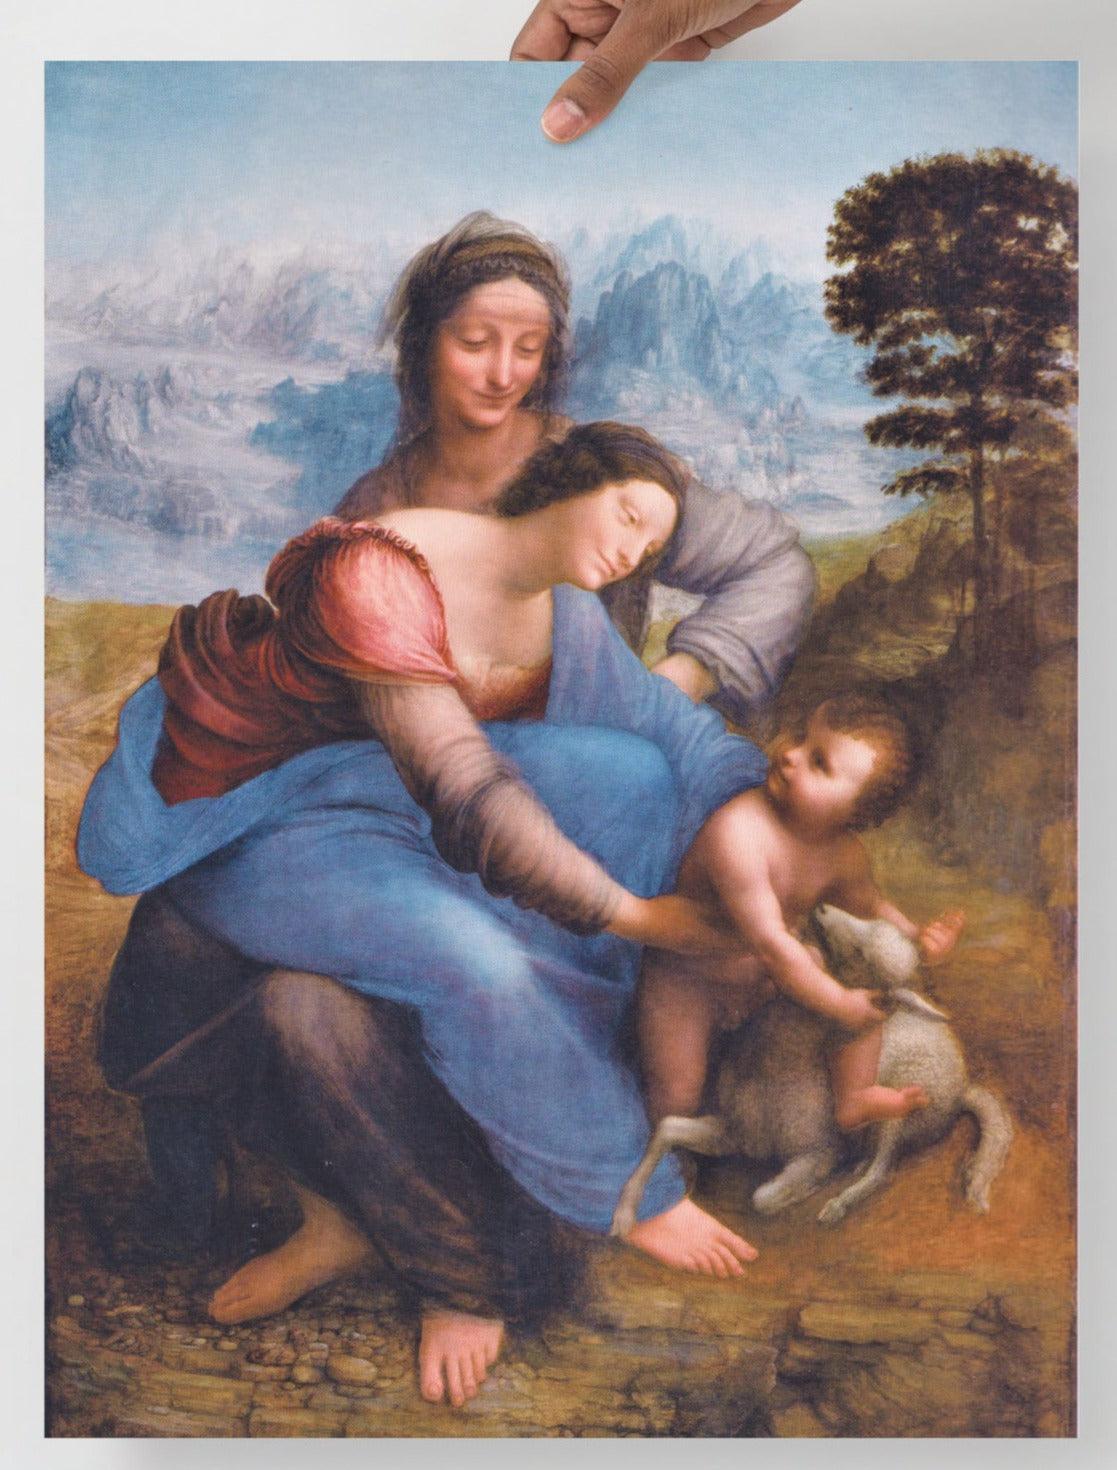 The Virgin and Child with Saint Anne by Leonardo da Vinci  poster on a plain backdrop in size 18x24”.